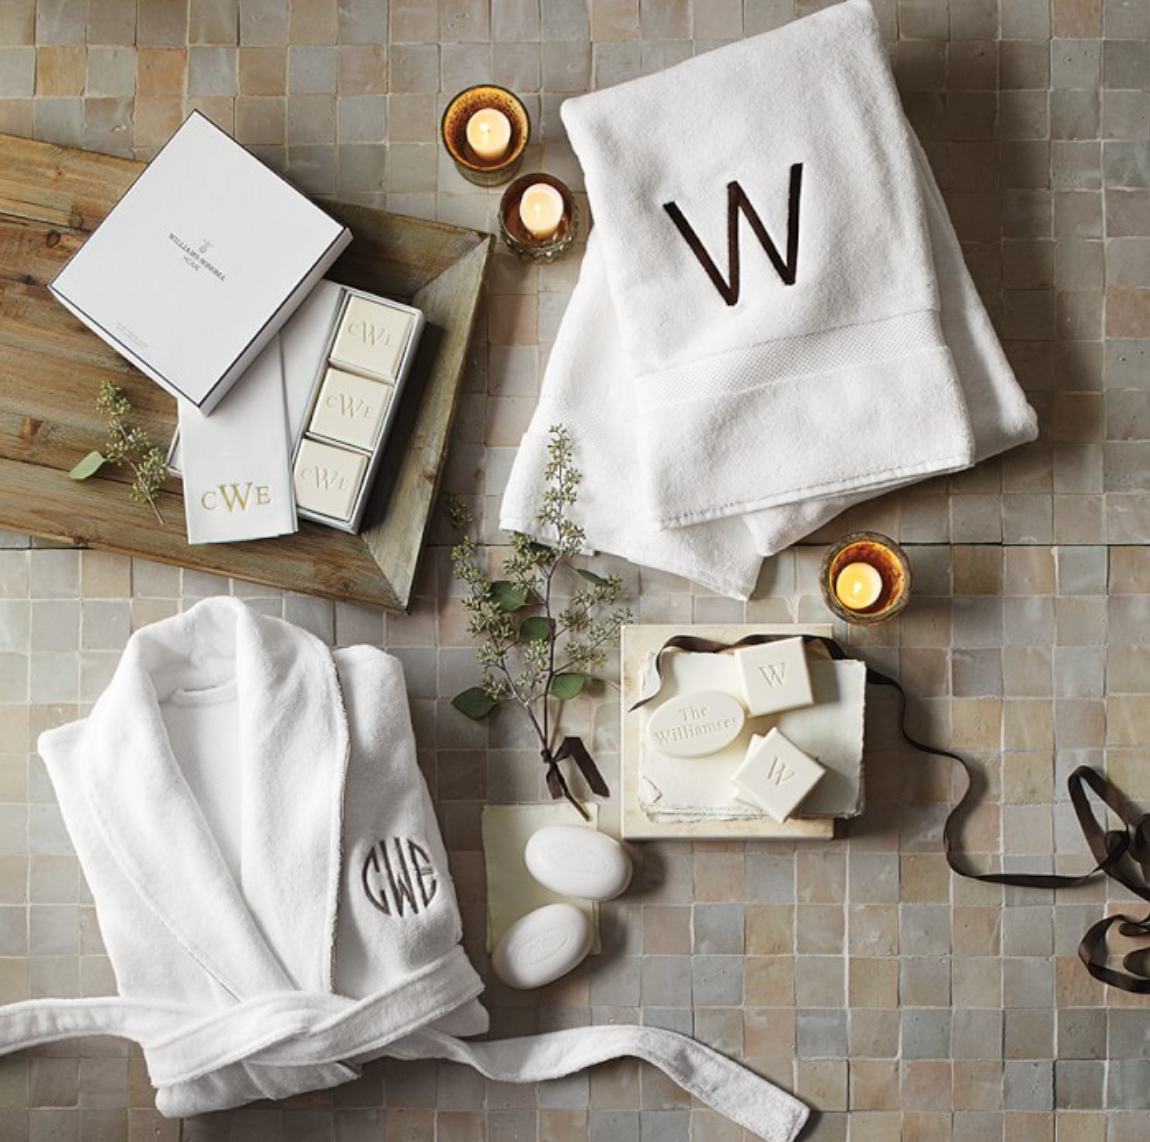 Williams Sonoma Home Monogrammed Soap & Towel Gift Set